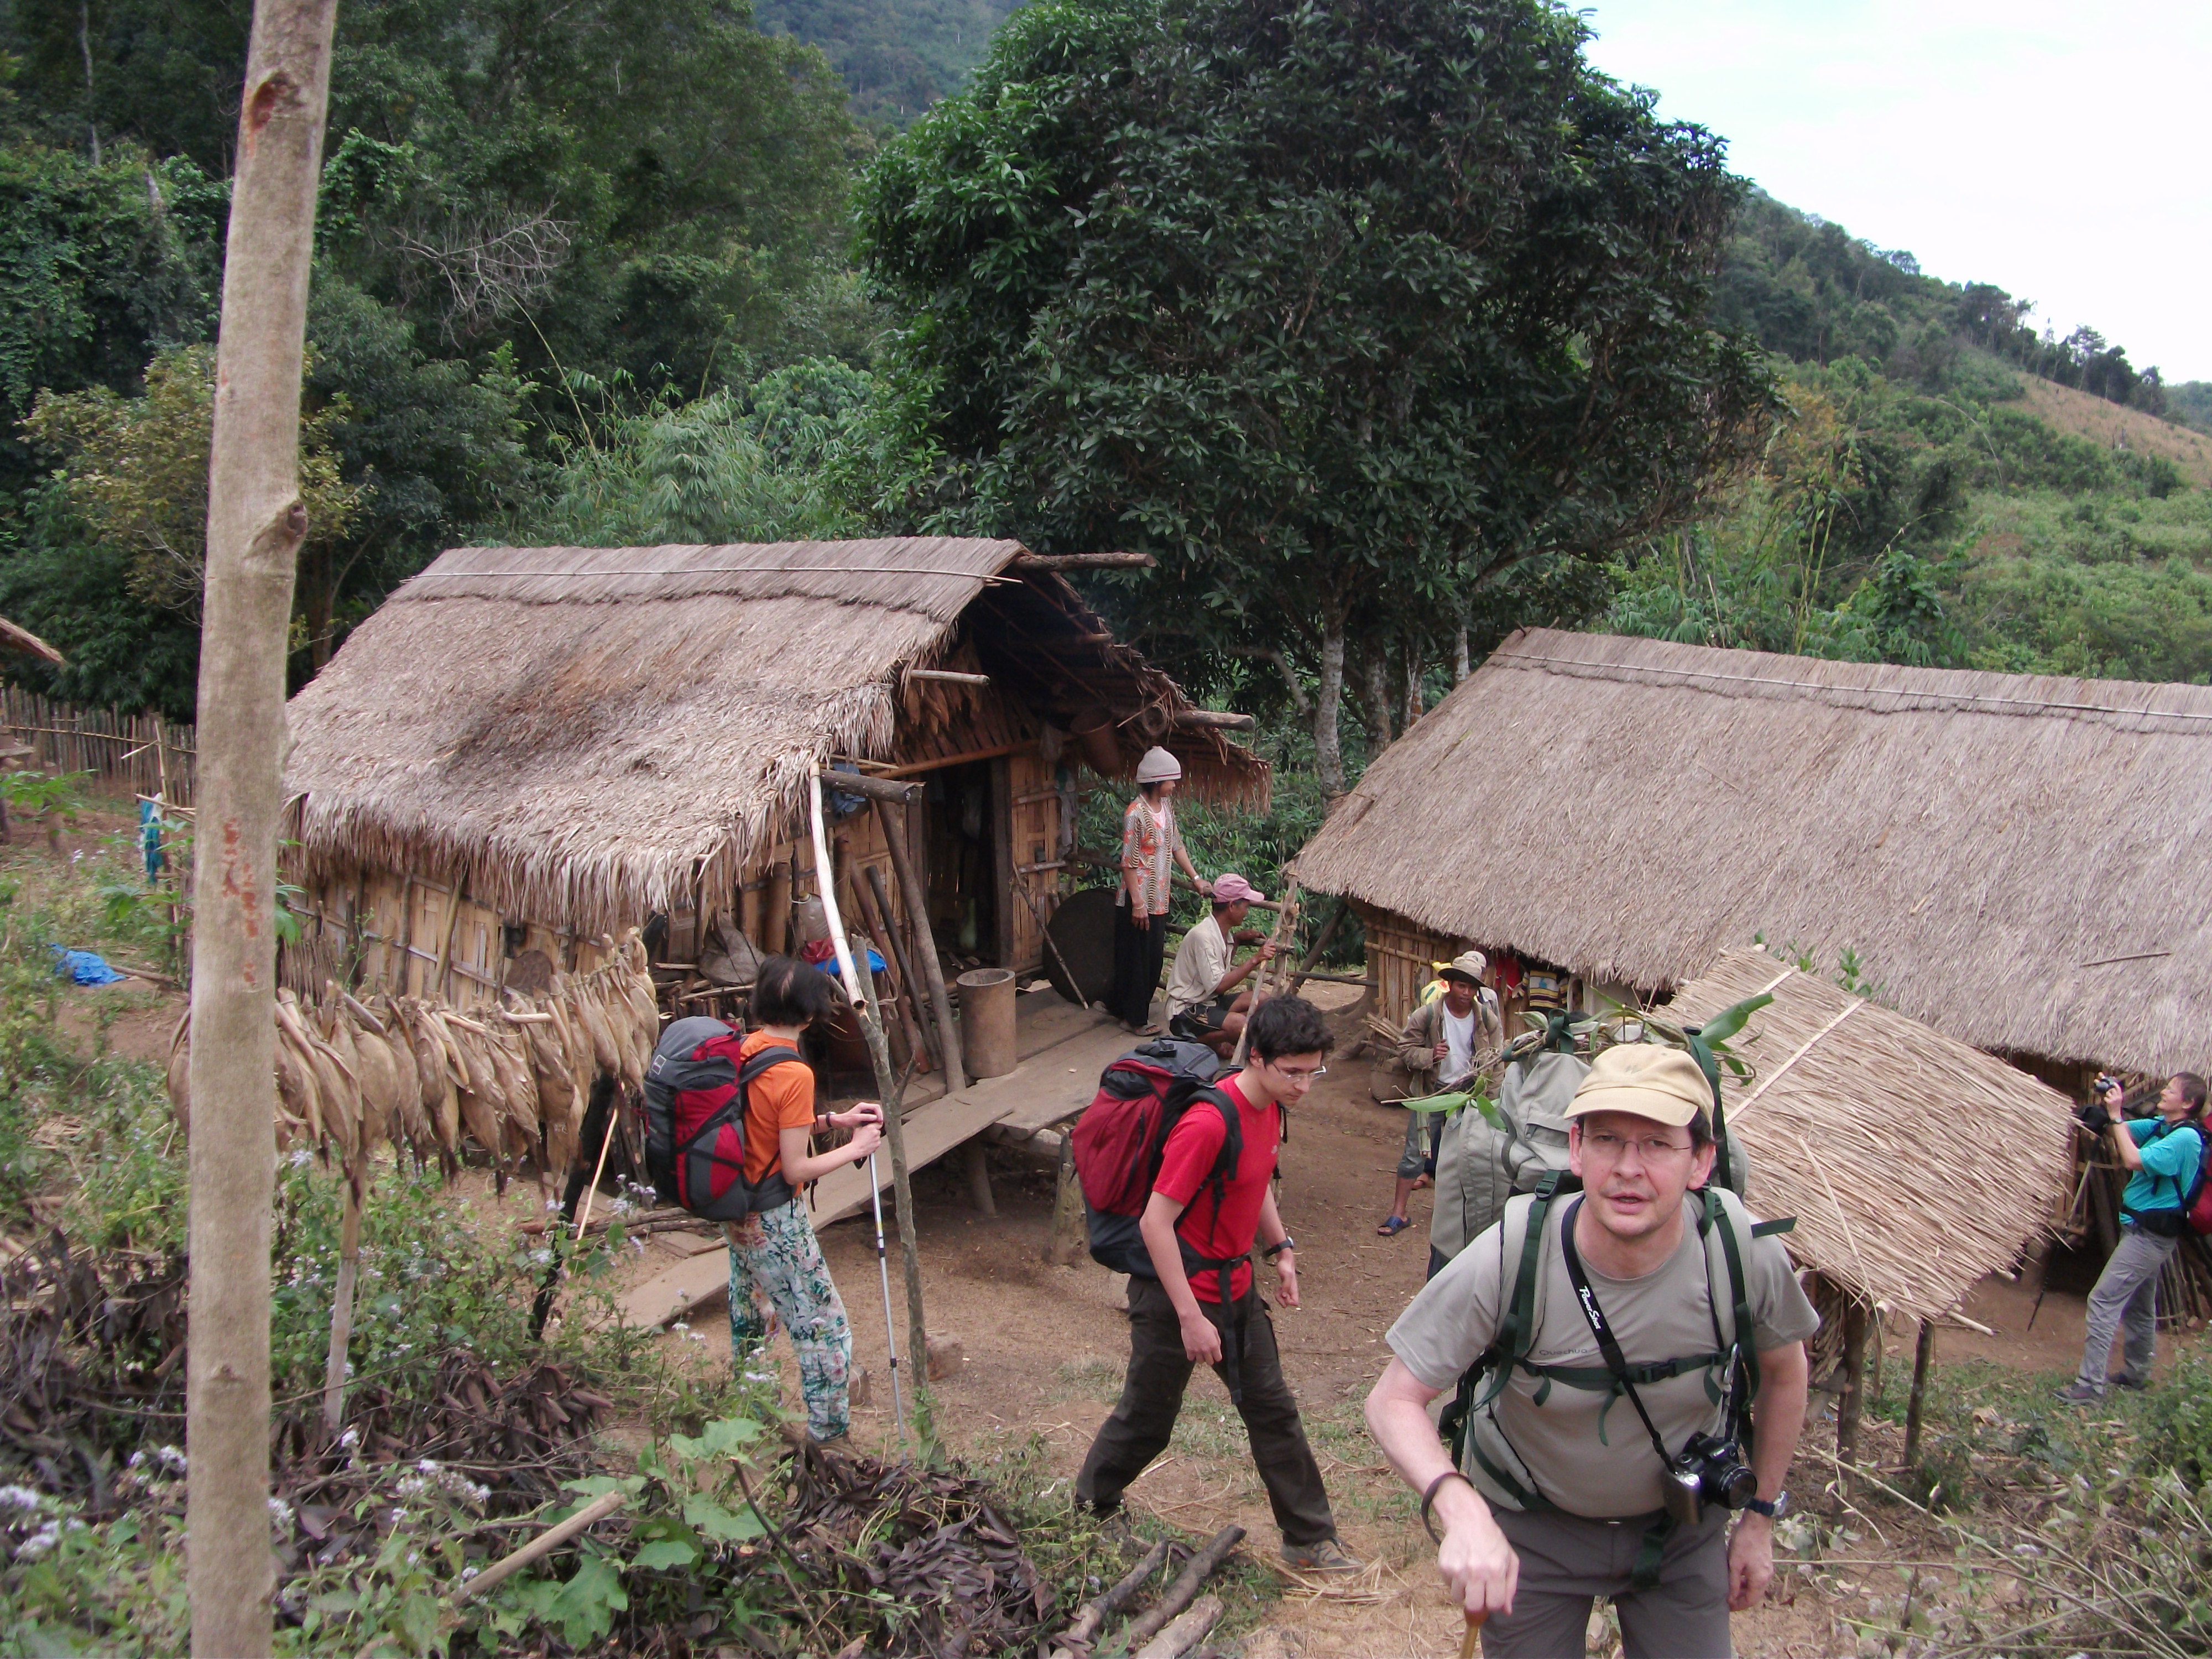 Trek through remote rural regions of North Vietnam on this 10 day Adventure Life Vietnam tour. Start your trek in White Hmong villages and continue through Red Dao and Co Lao minority communities for 6 days and 5 nights. Stay in the villages in tents or small guest houses and interact with the locals who rarely see foreign visitors. 